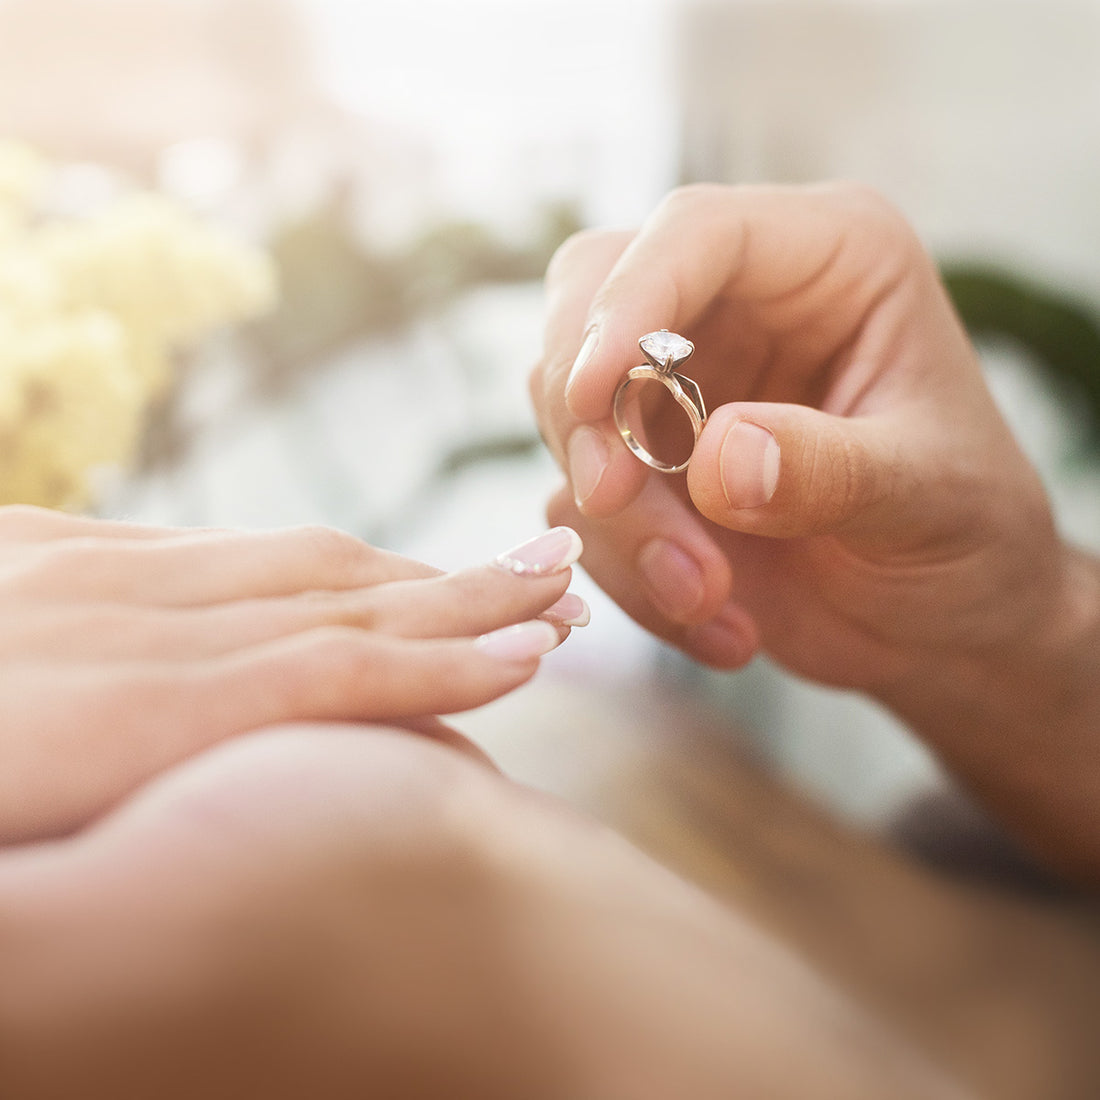 How to Buy an Engagement Ring in 5 Simple Steps